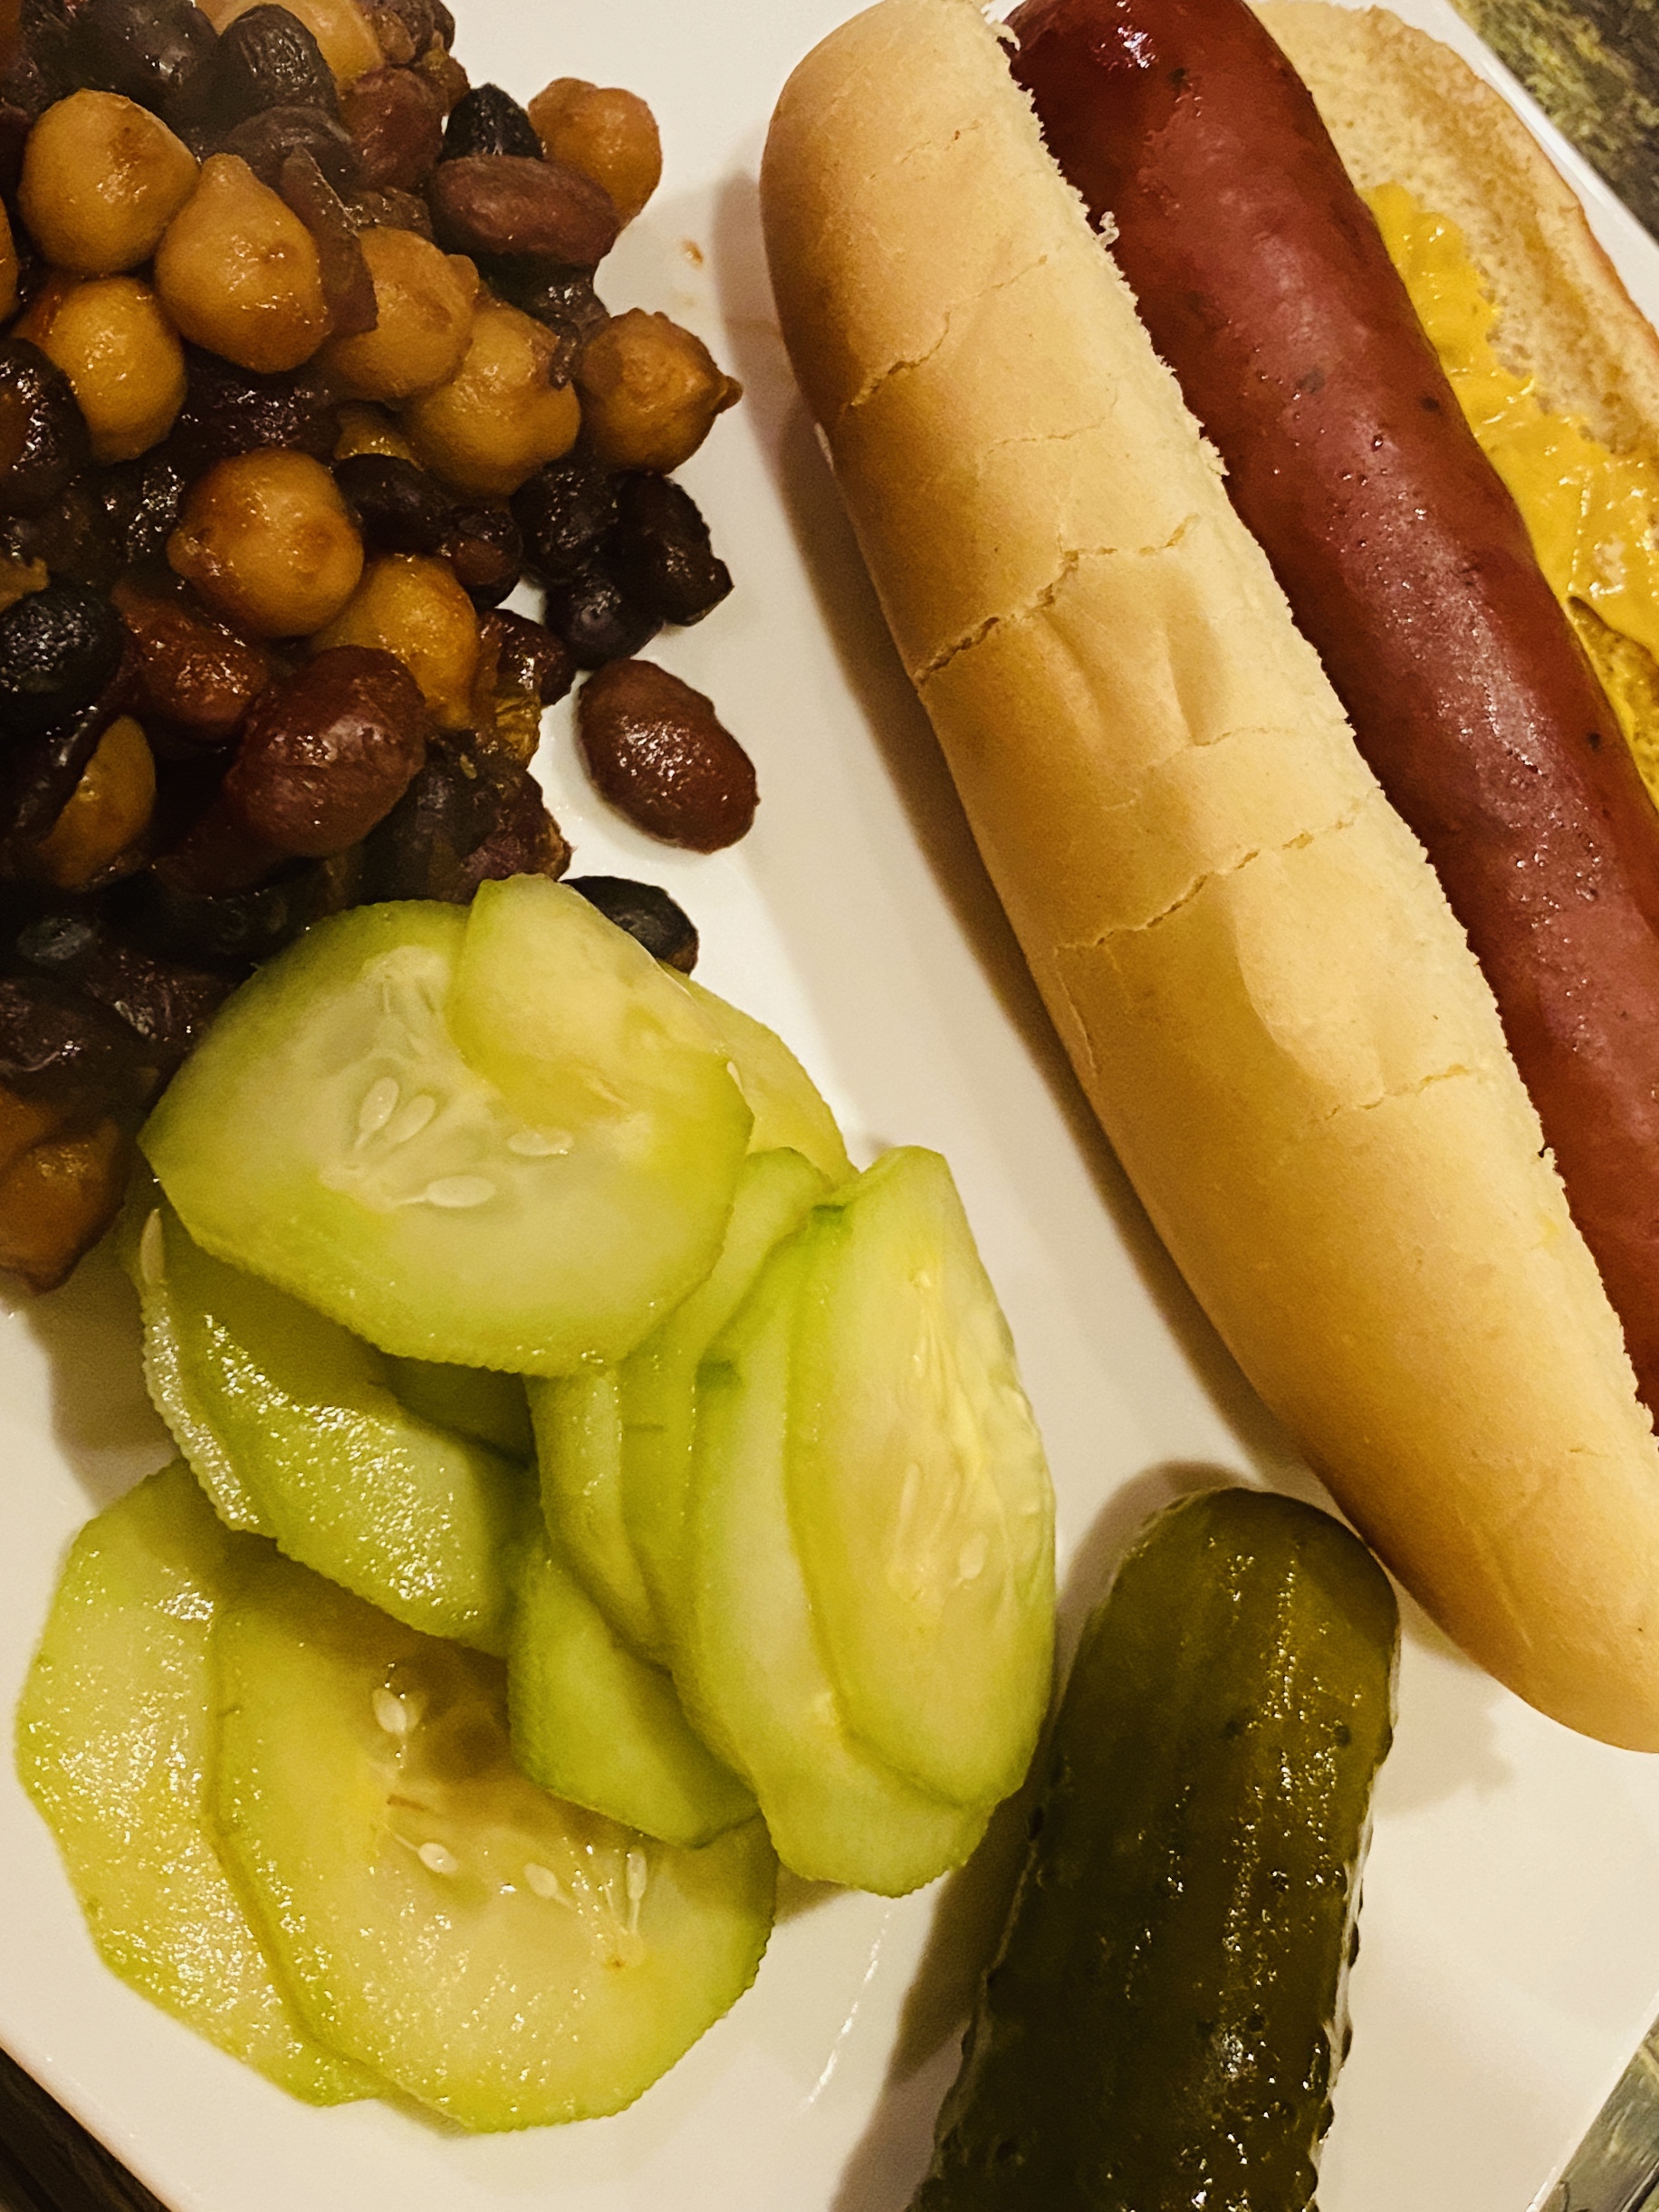 Hot dogs, baked beans, cucumbers, pickles - Chef Marian